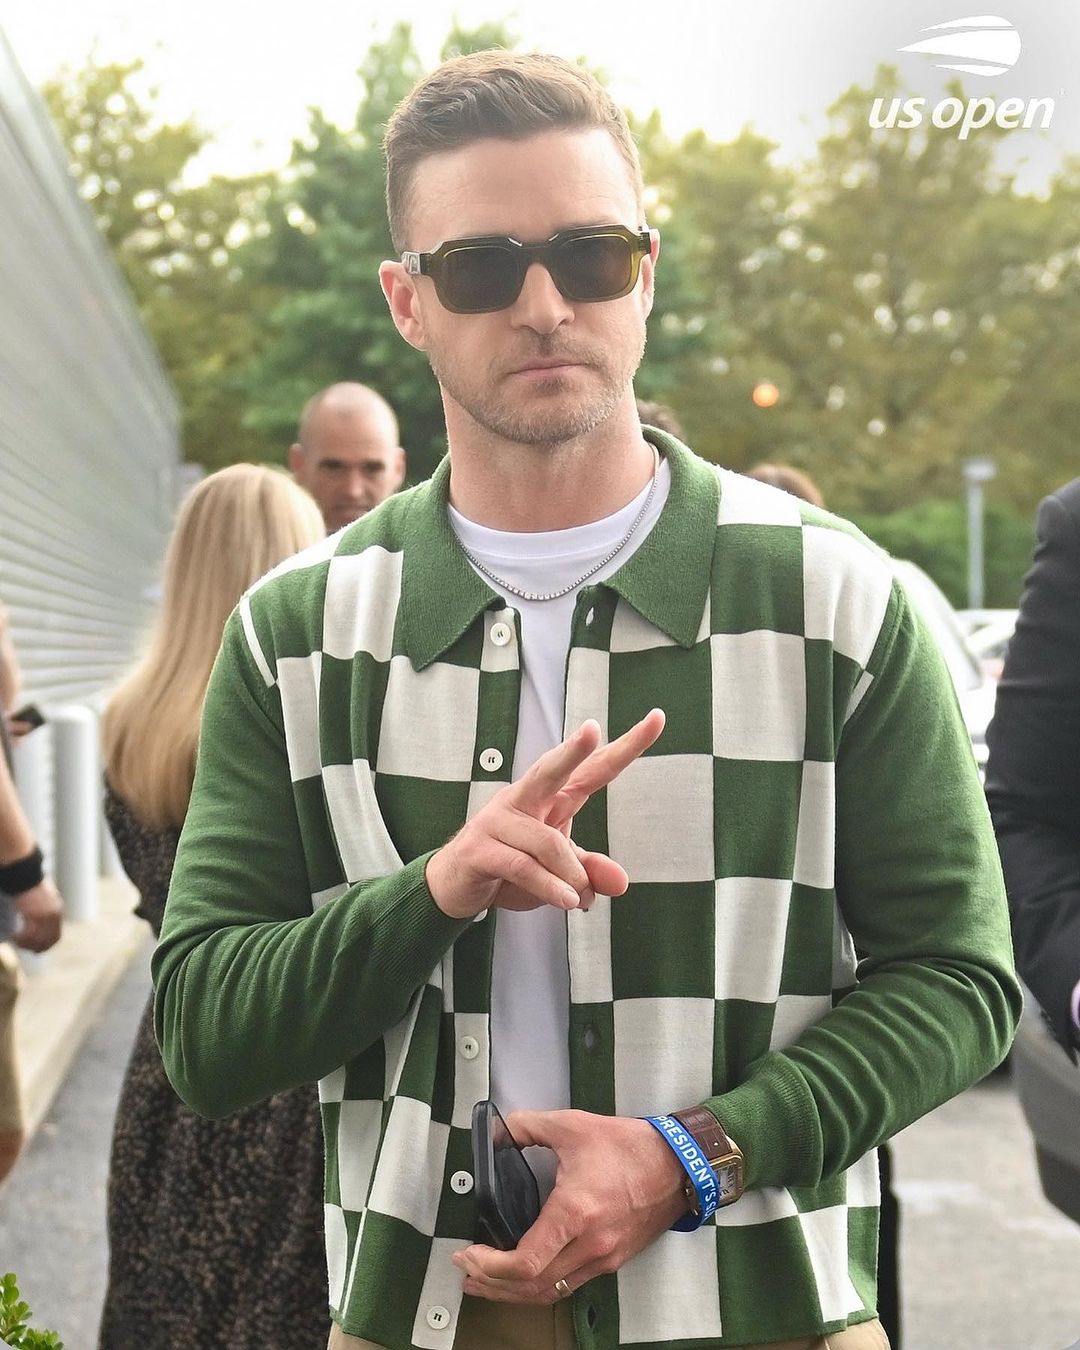 JUSTIN TIMBERLAKE wearing the THIERRY LASRY "VENDETTY" Sunglasses